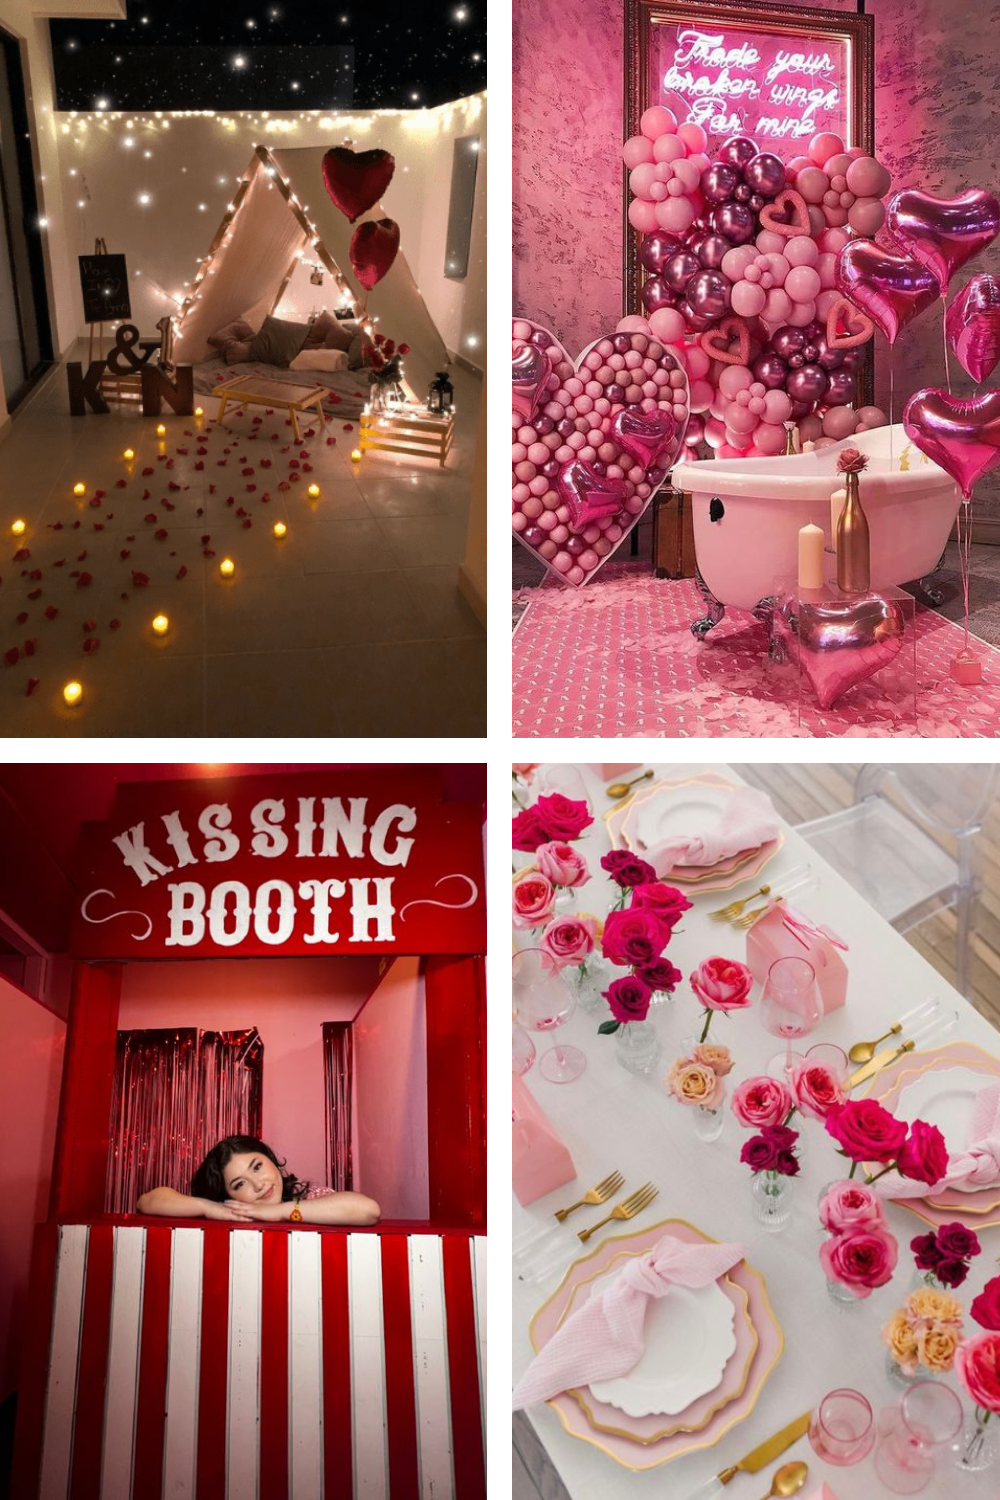 31 Valentines Day Decor to Fall Head Over Heels in Love With!